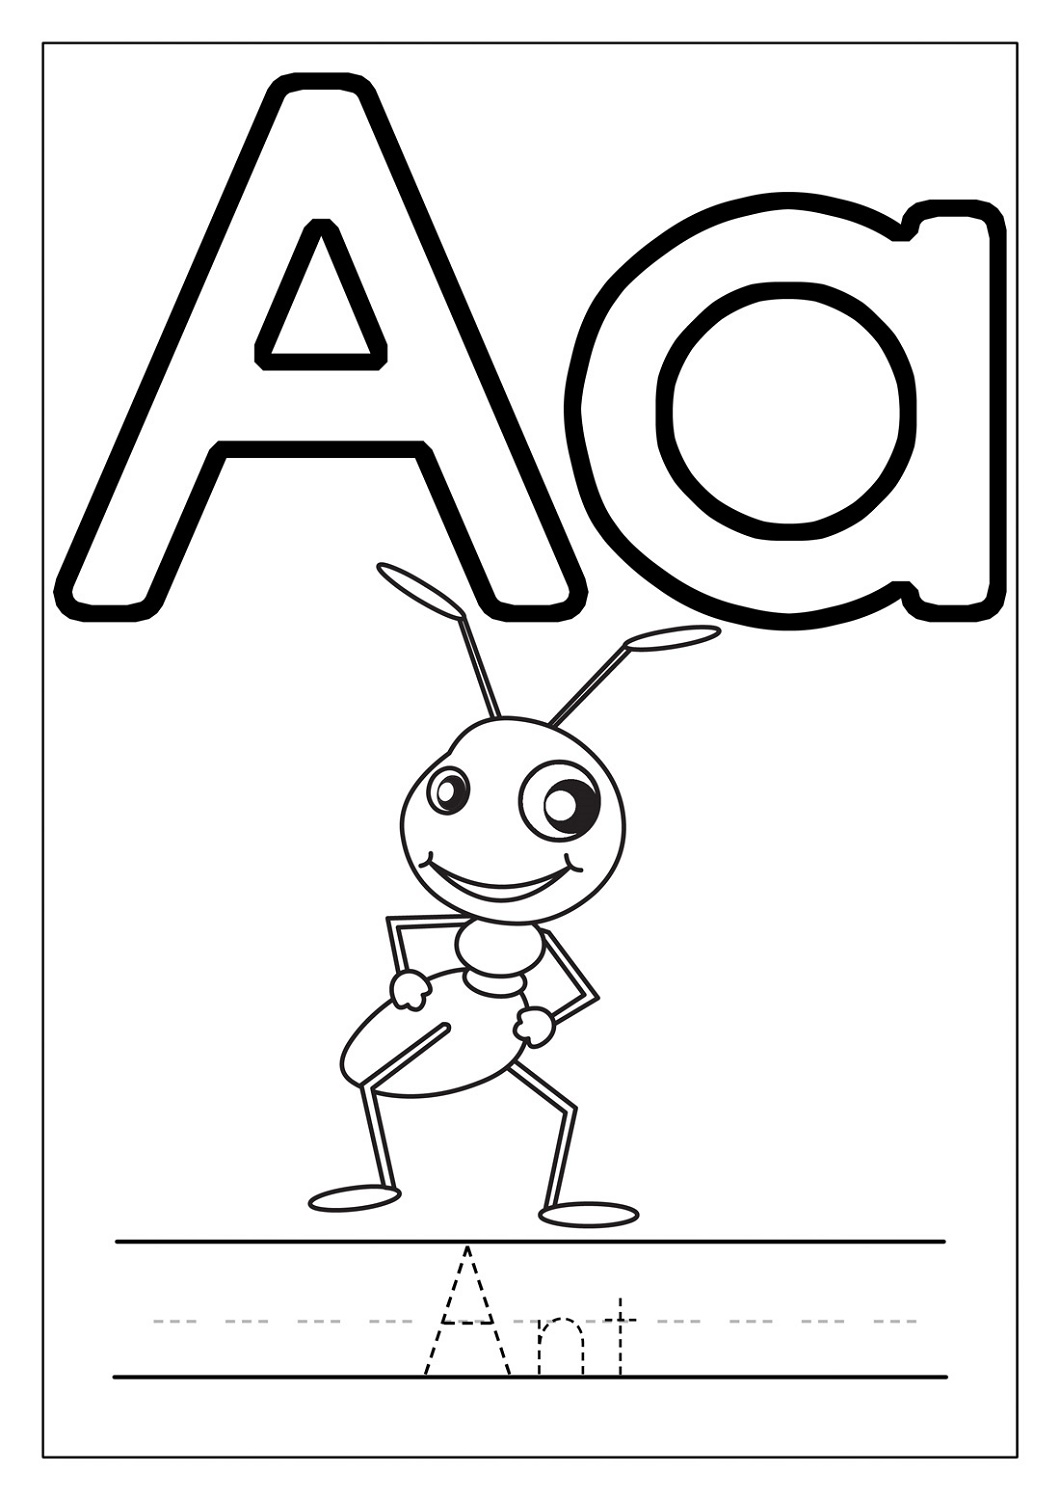 Letter A Coloring Pages For Kids